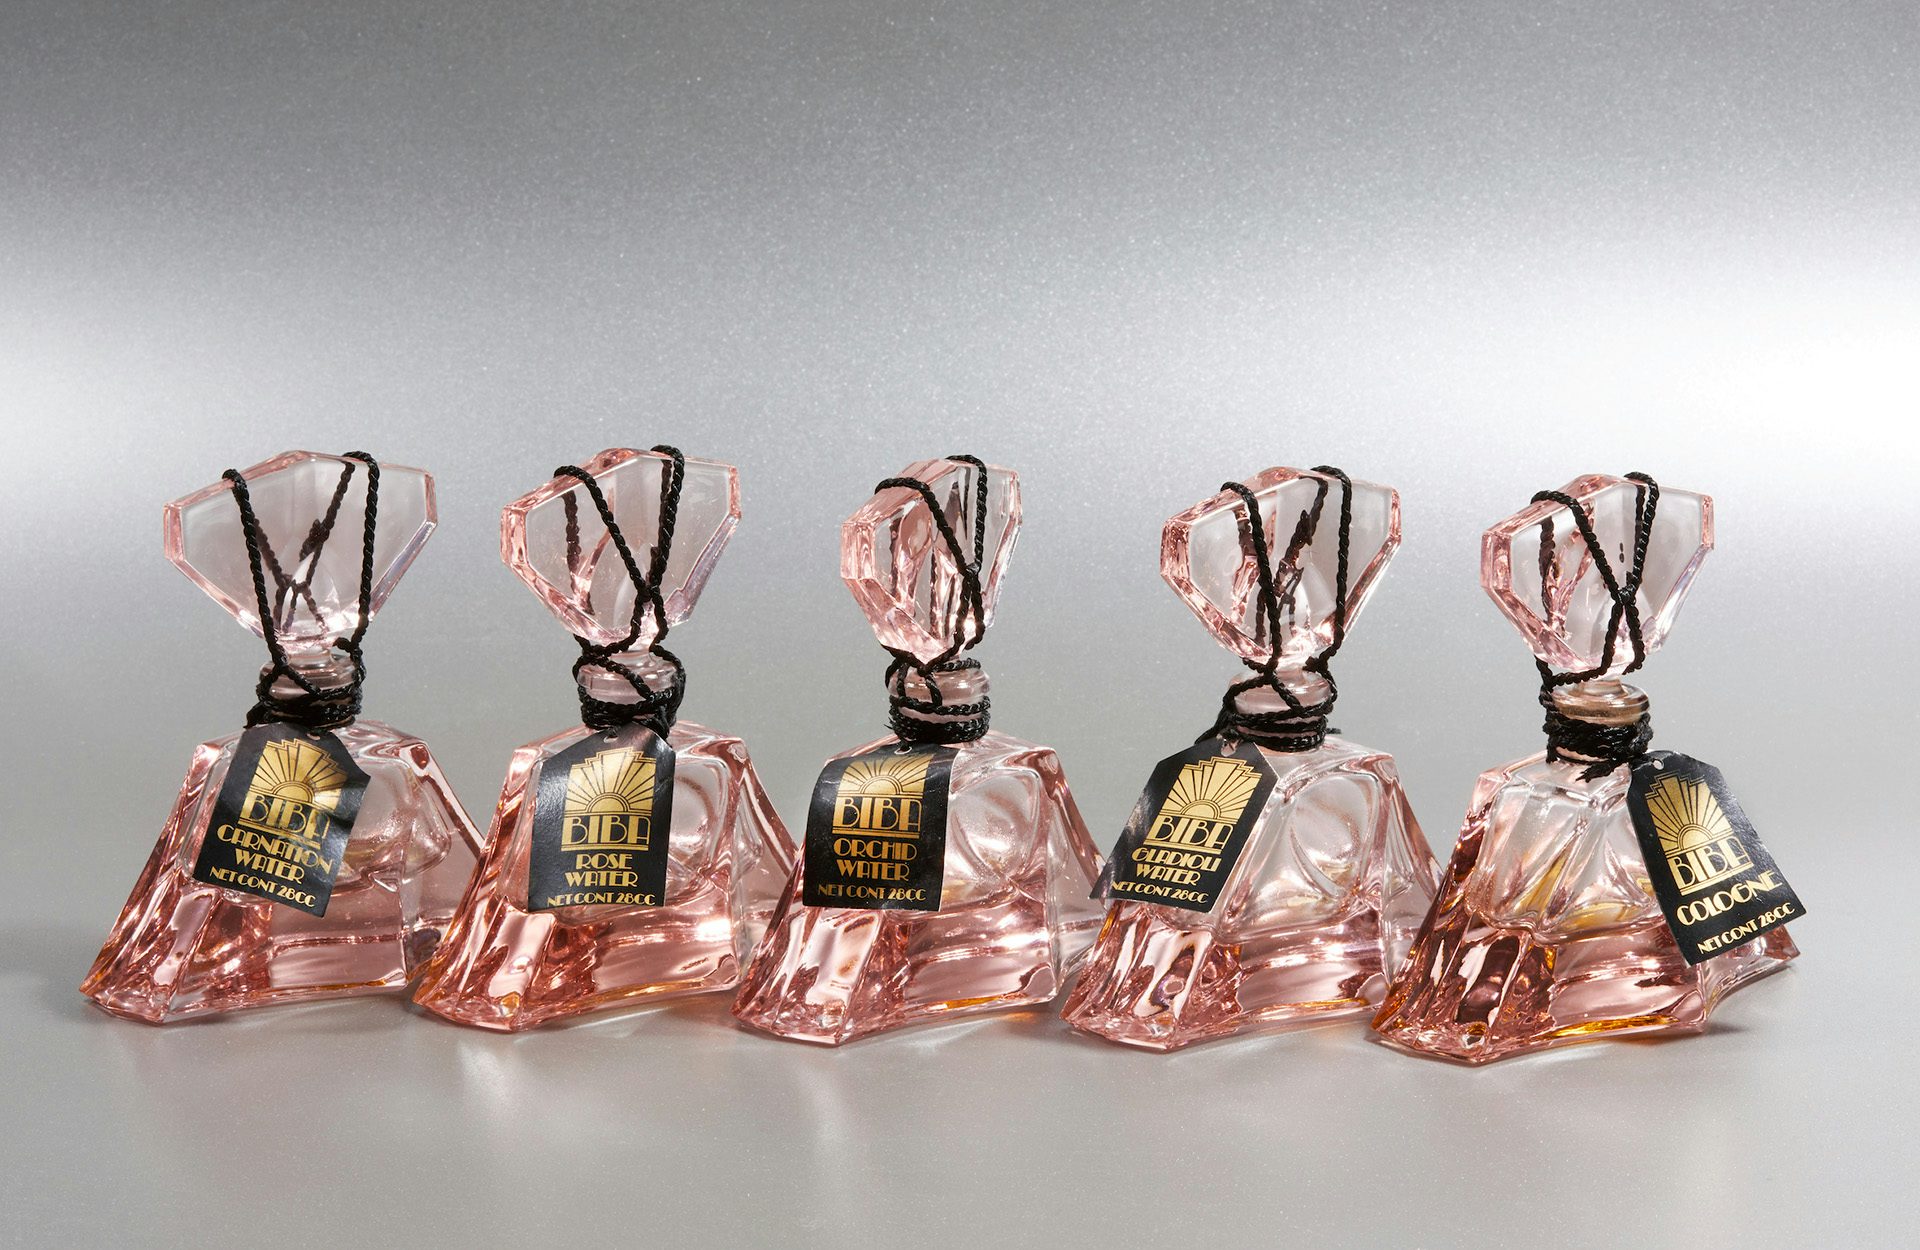 Photograph showing a row of five pink glass fragrance bottles by Biba